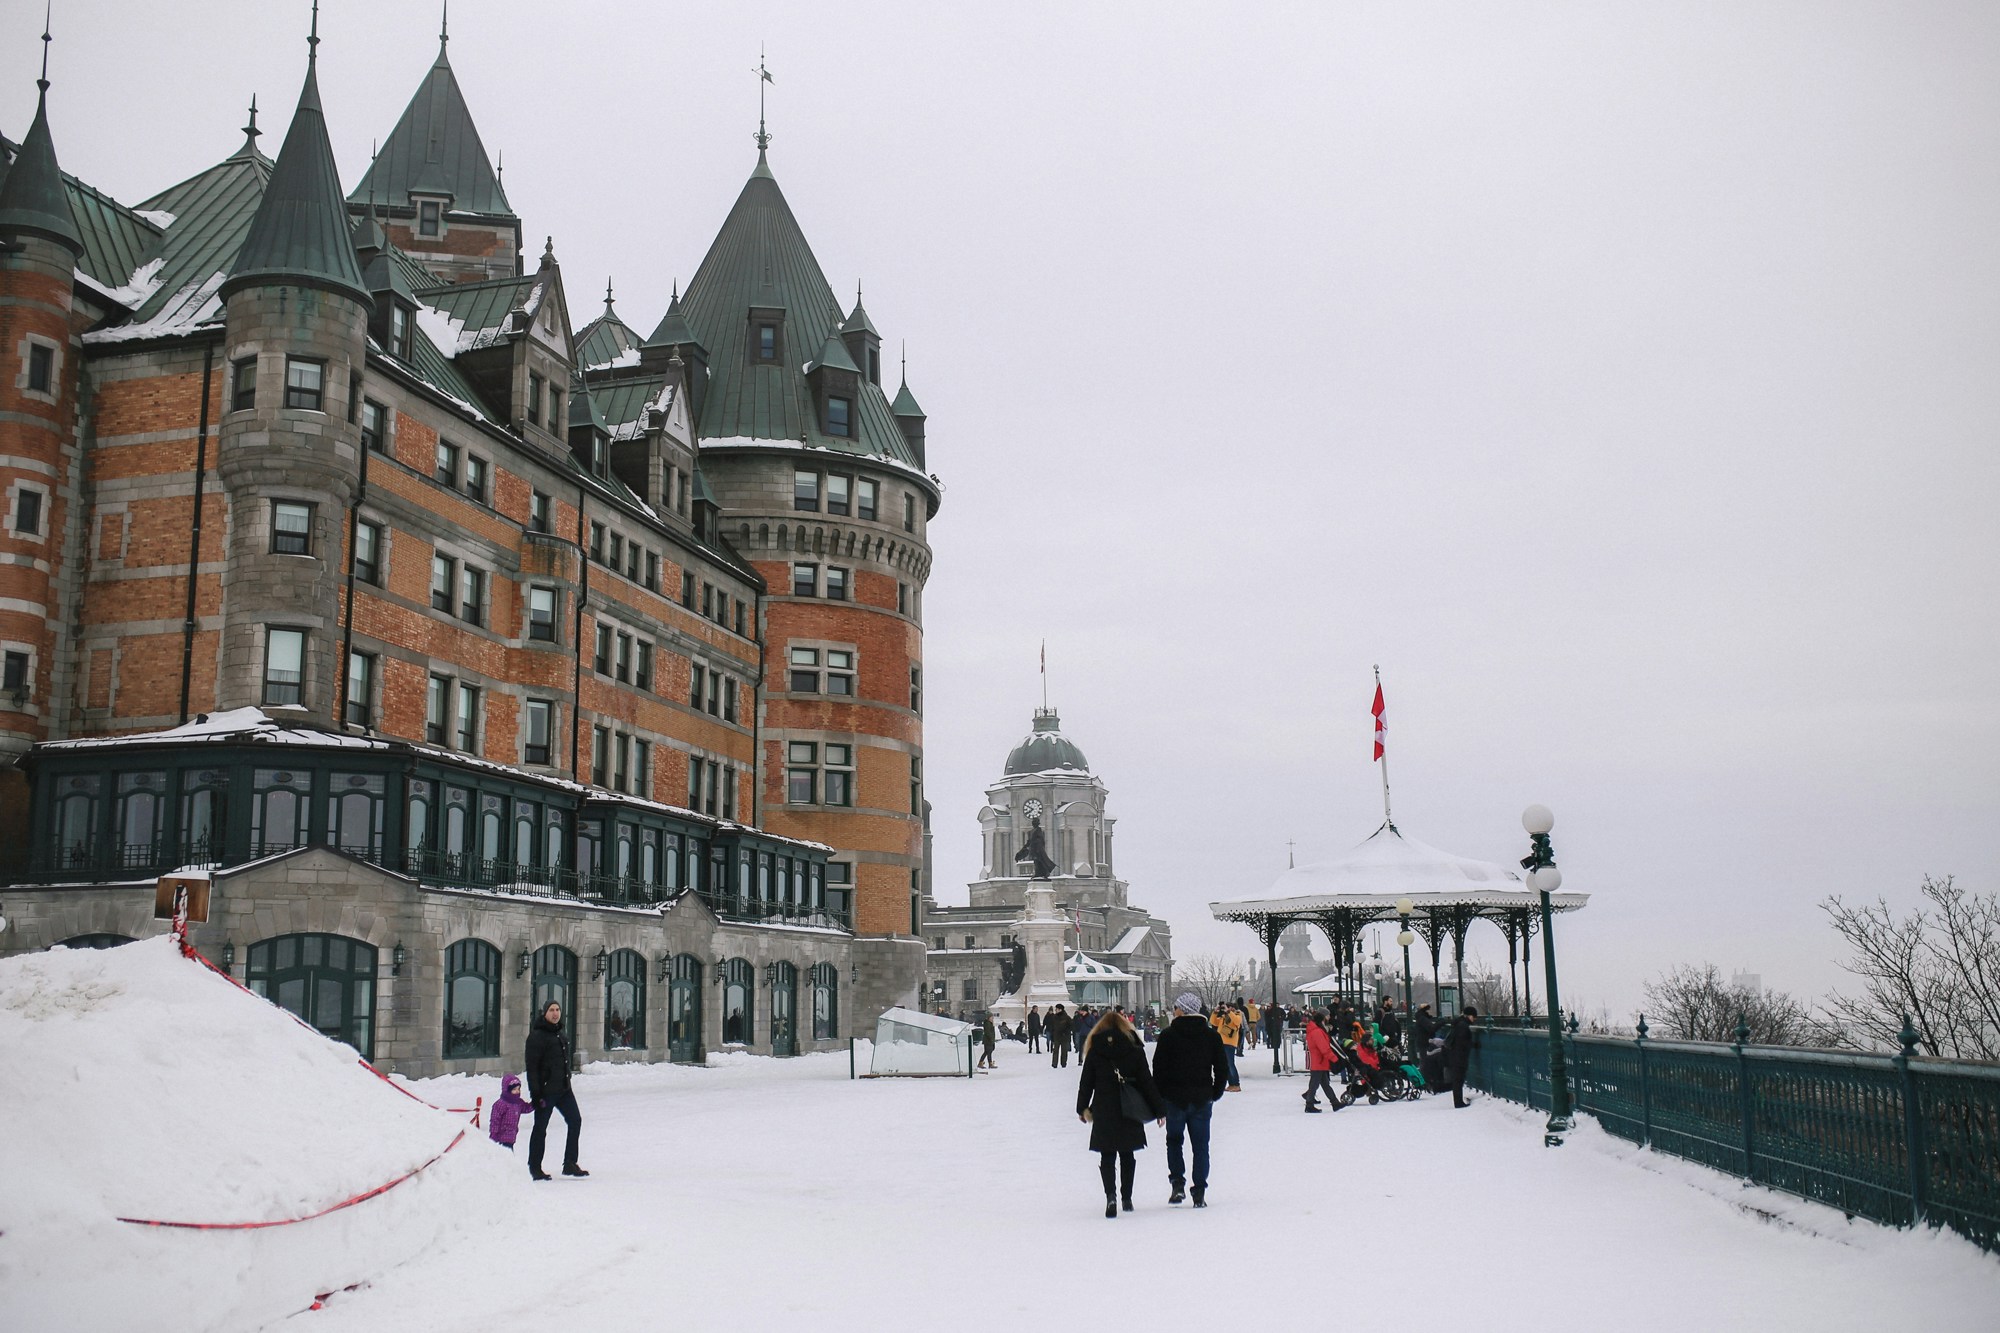 Beautiful Château Frontenac in Quebec City